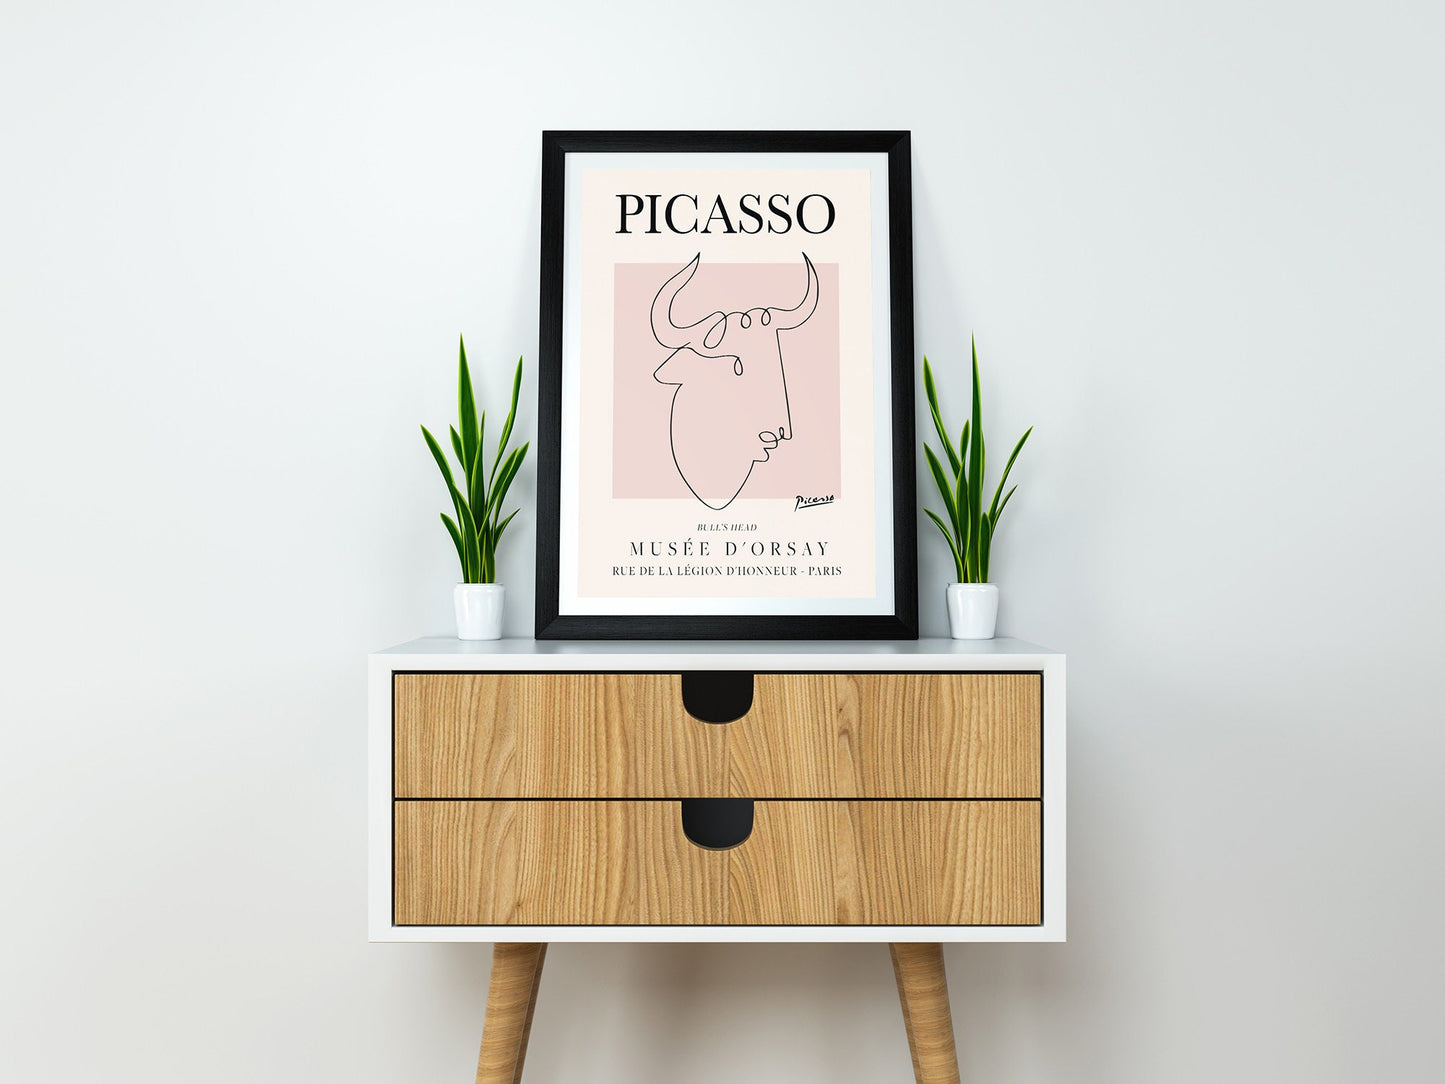 Picasso - Bull's Head, Exhibition Vintage Line Art Poster, Minimalist Line Drawing, Ideal Home Decor or Gift Print